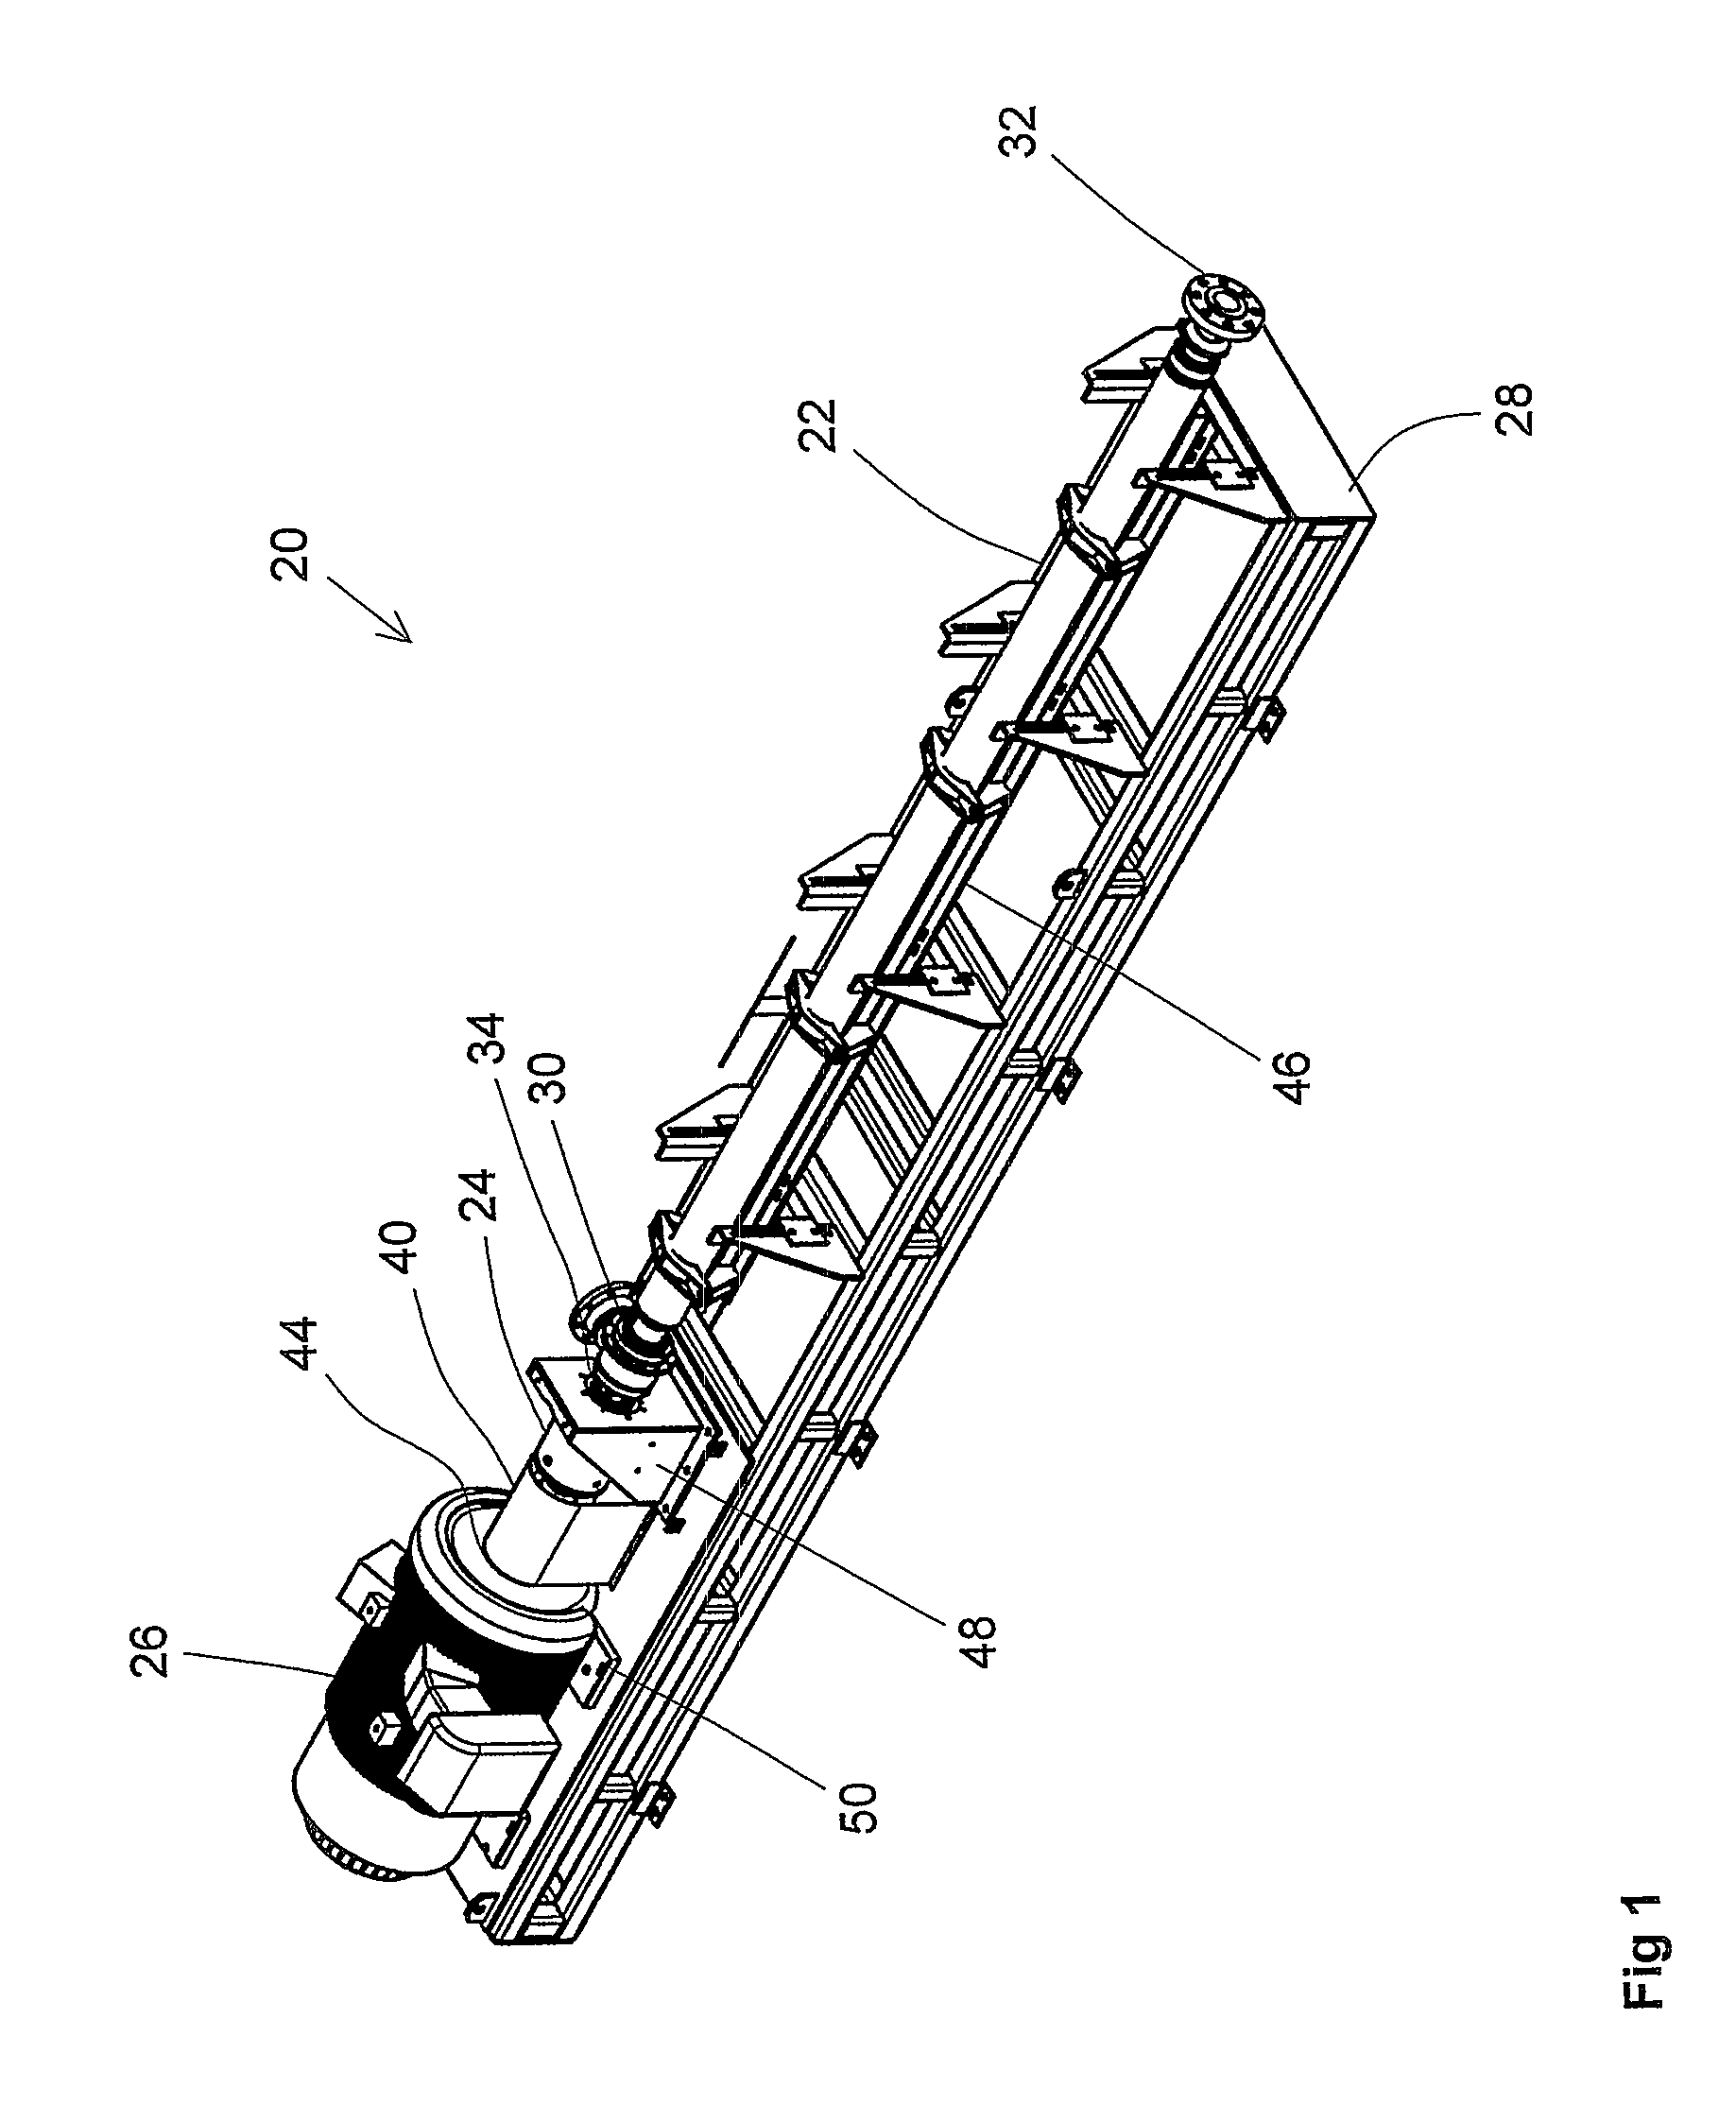 Thrust box and skid for a horizontally mounted submersible pump